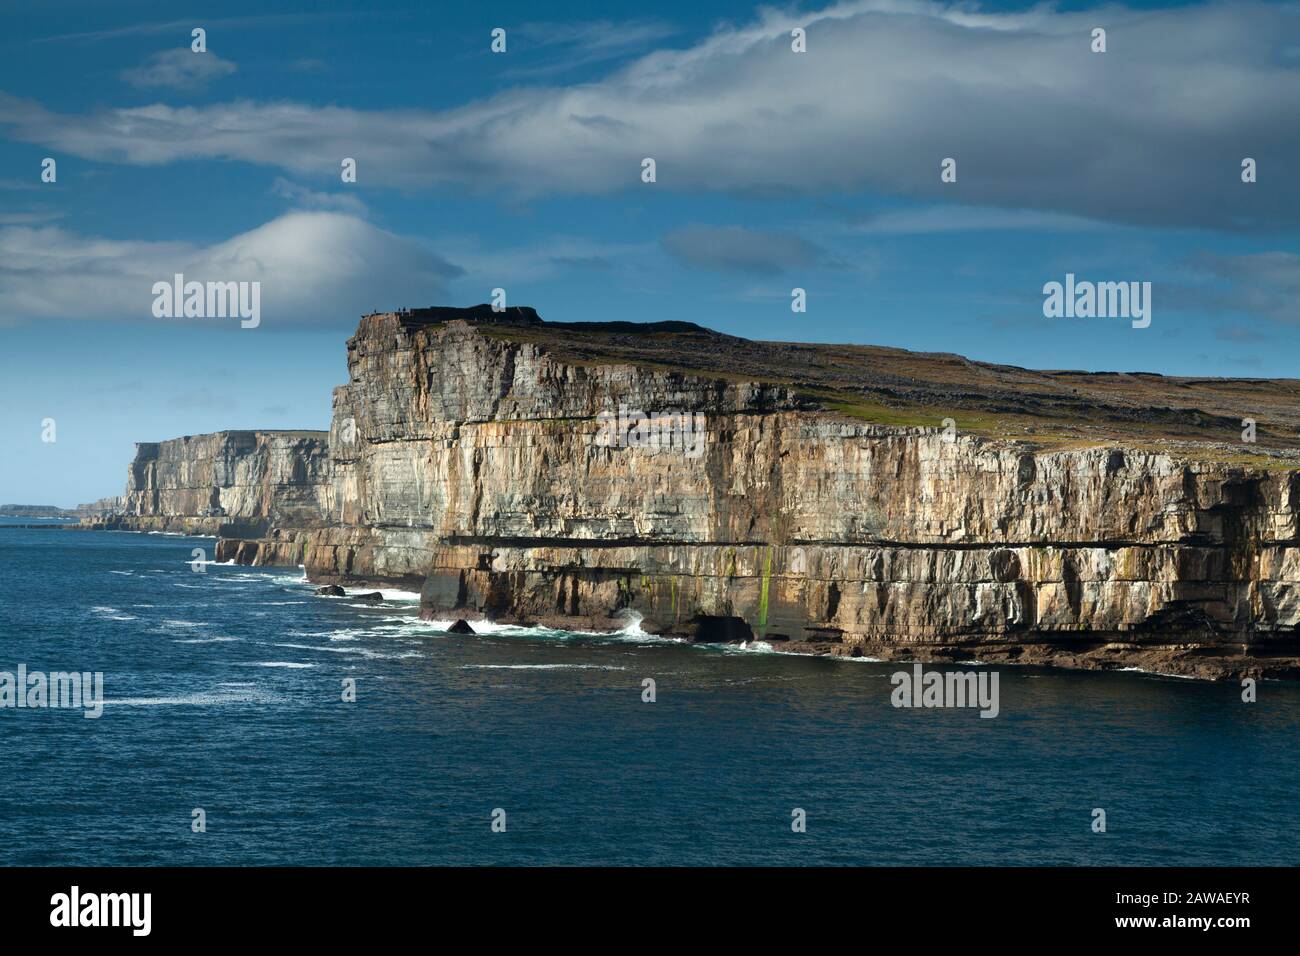 Dun Aonghasa fort on the cliffs of Inishmore island, largest of the Aran islands on the Wild Atlantic Way in Galway Ireland Stock Photo